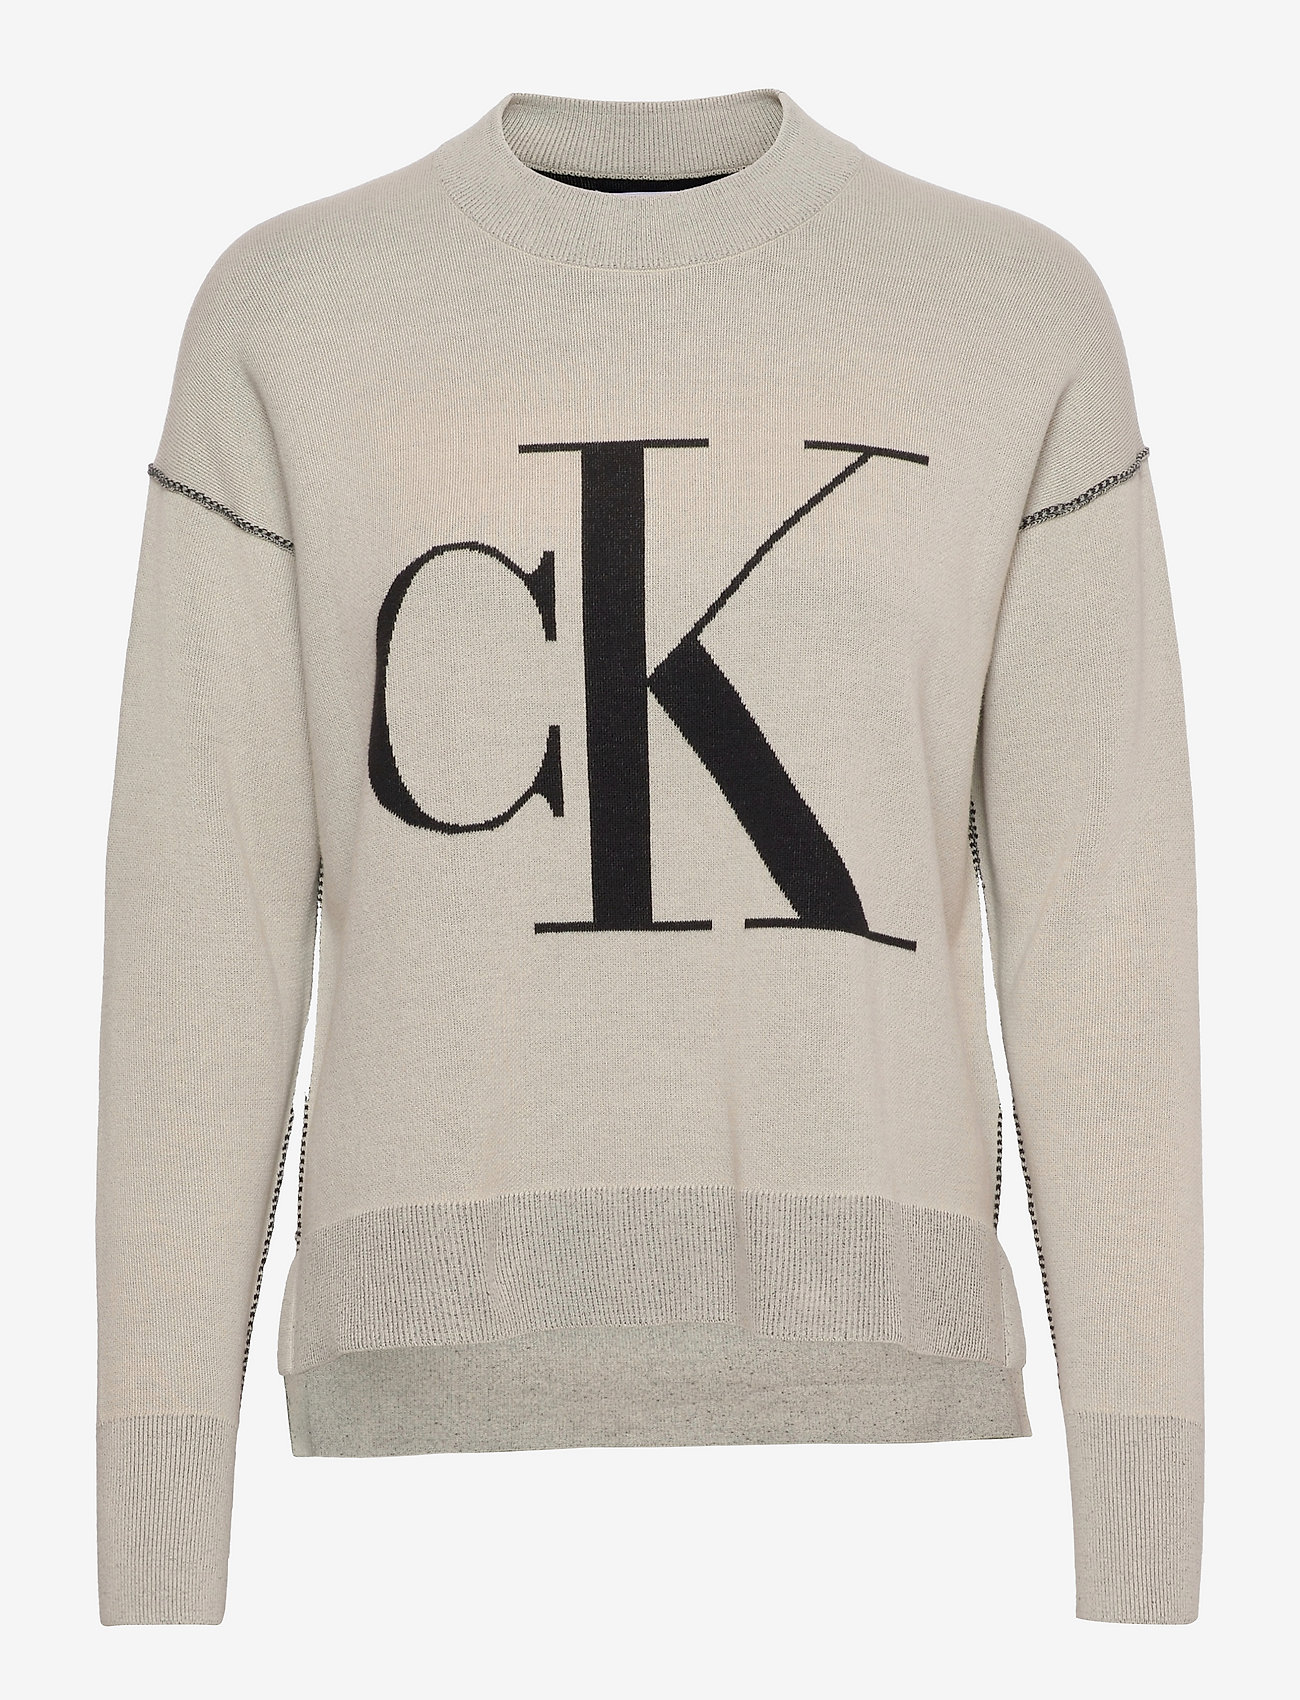 Calvin Klein Jeans Ck Loose Sweater - Jumpers | Boozt.com